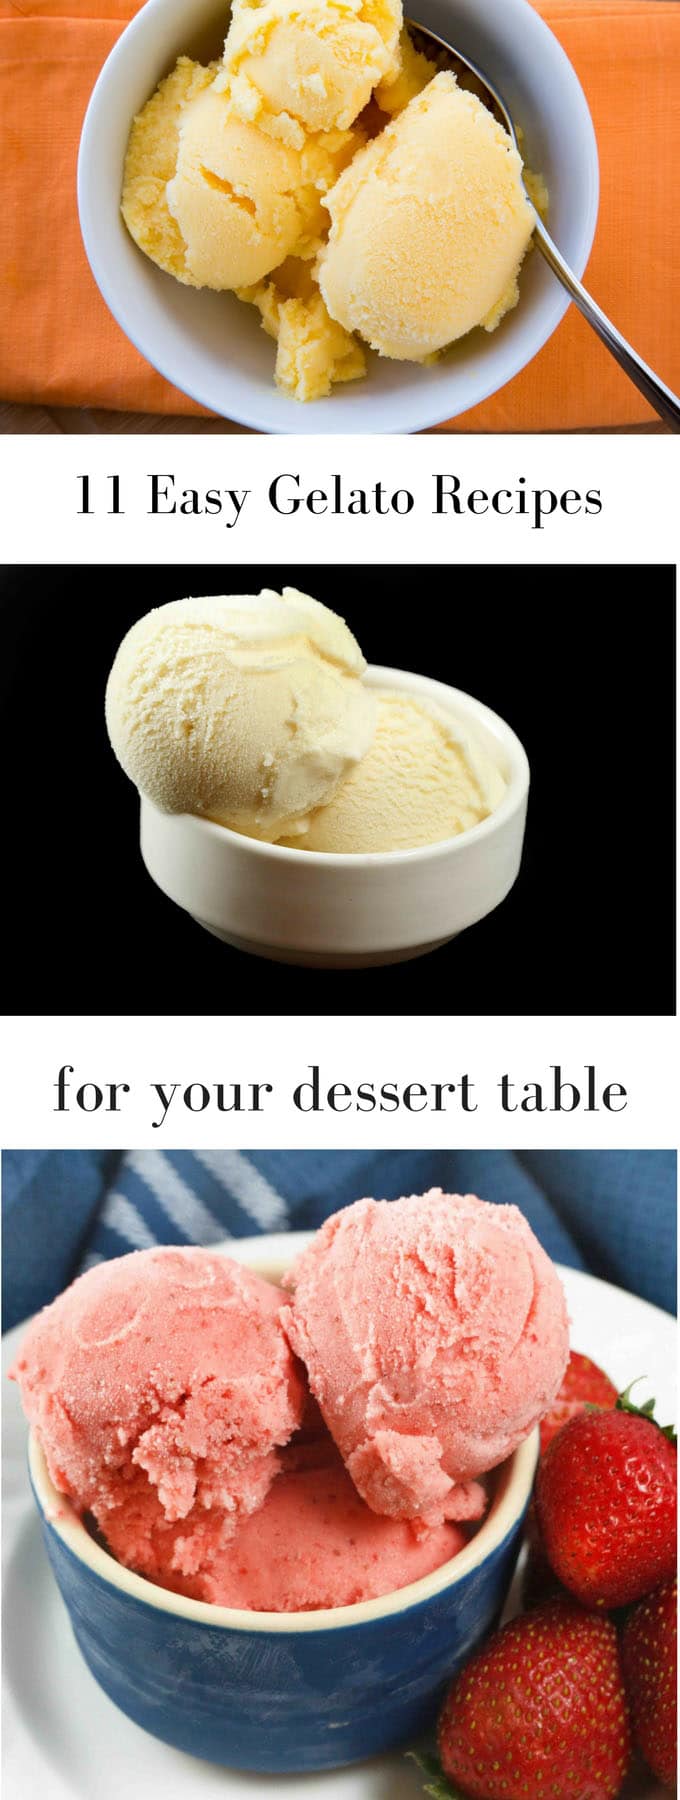 Gelato or ice cream, it’s the perfect addition to your dessert table, you’ll love my easy recipes and so will your guests.